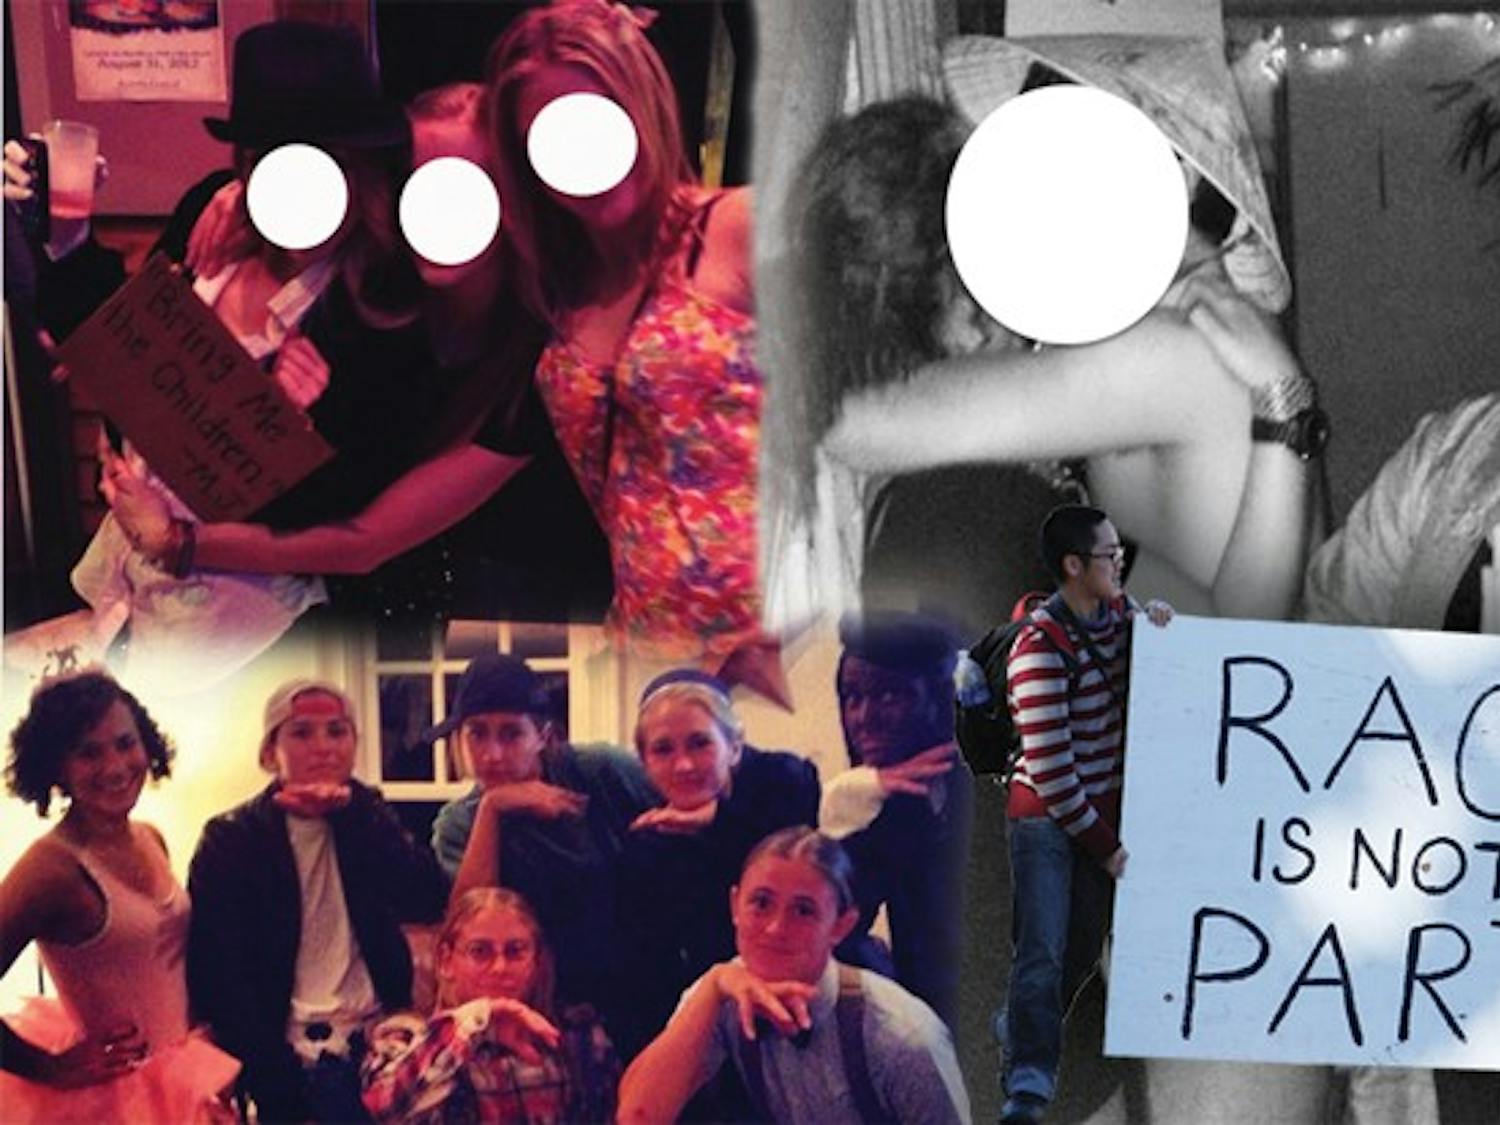 Clockwise from top left, students pose at a “Creepy Guys and Cutie Pies” party; “Asia Prime” party attendees dress in stereotypical costumes; activists hold a sign protesting the “Asia Prime” party; the women’s lacrosse team wears a costume involving blackface.